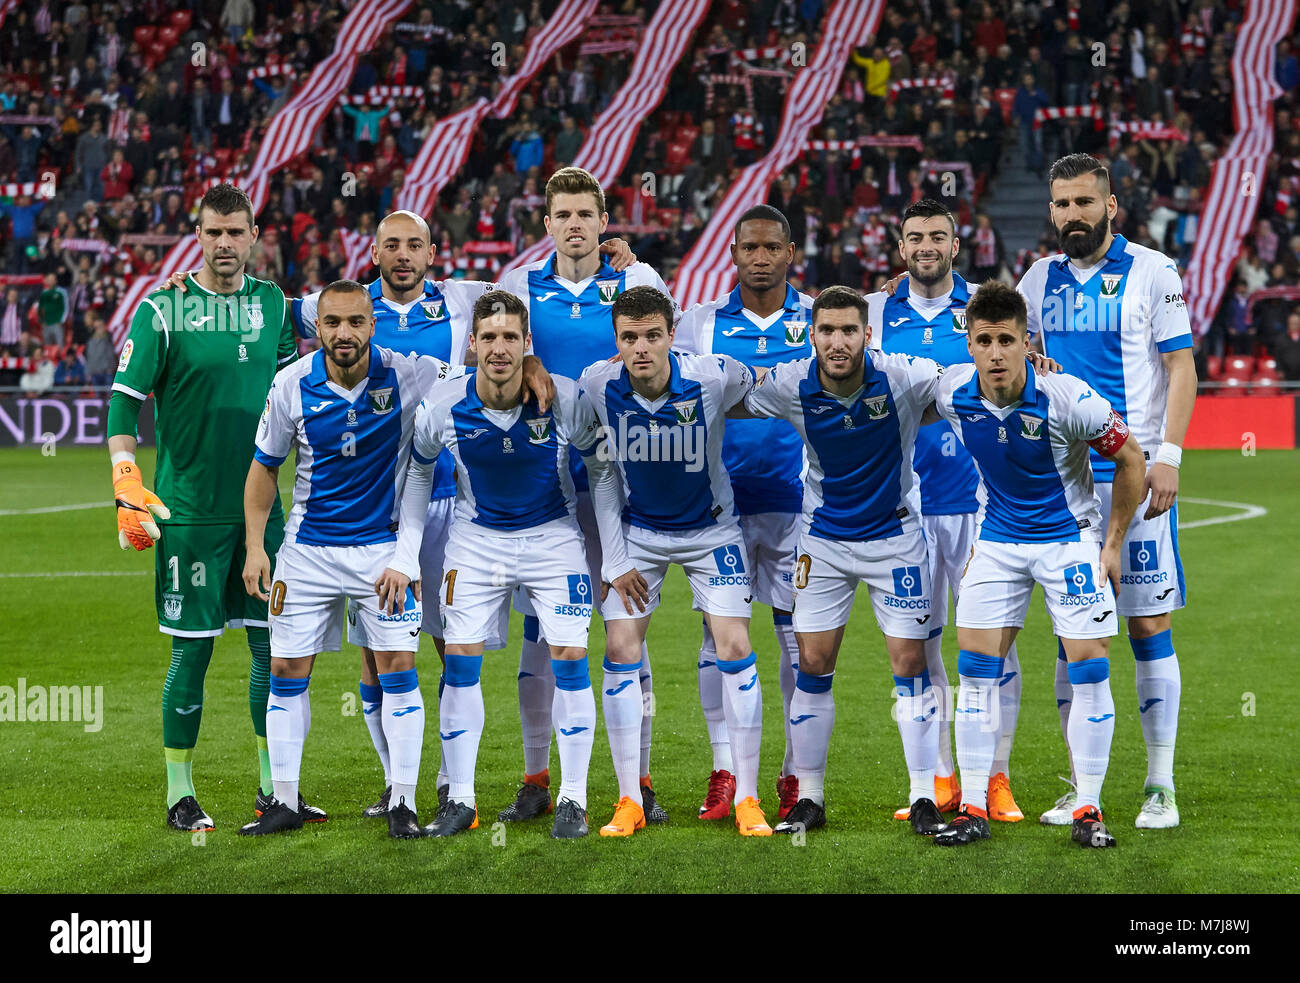 C.D Leganes during the Spanish La Liga soccer match between Athletic Club Bilbao and C.D Leganes at San Mames stadium, in Bilbao, northern Spain, Sunday, March, 11, 2018. Credit: Gtres Información más Comuniación on line, S.L./Alamy Live News Stock Photo